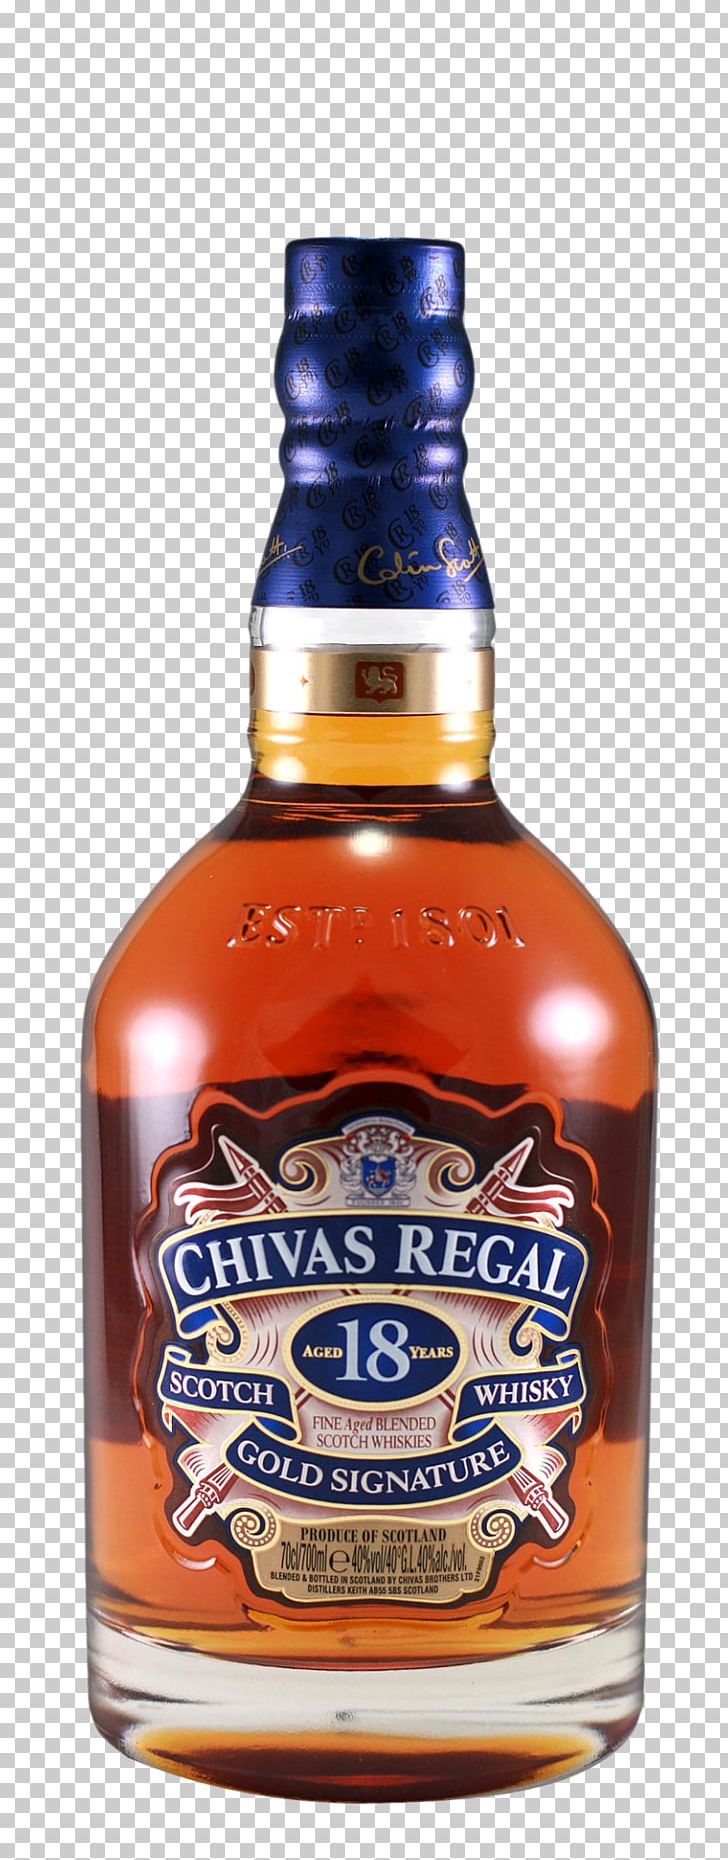 Chivas Regal Scotch Whisky Blended Whiskey Single Malt Whisky PNG, Clipart, 18 Years, Alcohol By Volume, Alcoholic Beverage, Blended Malt Whisky, Bottle Free PNG Download